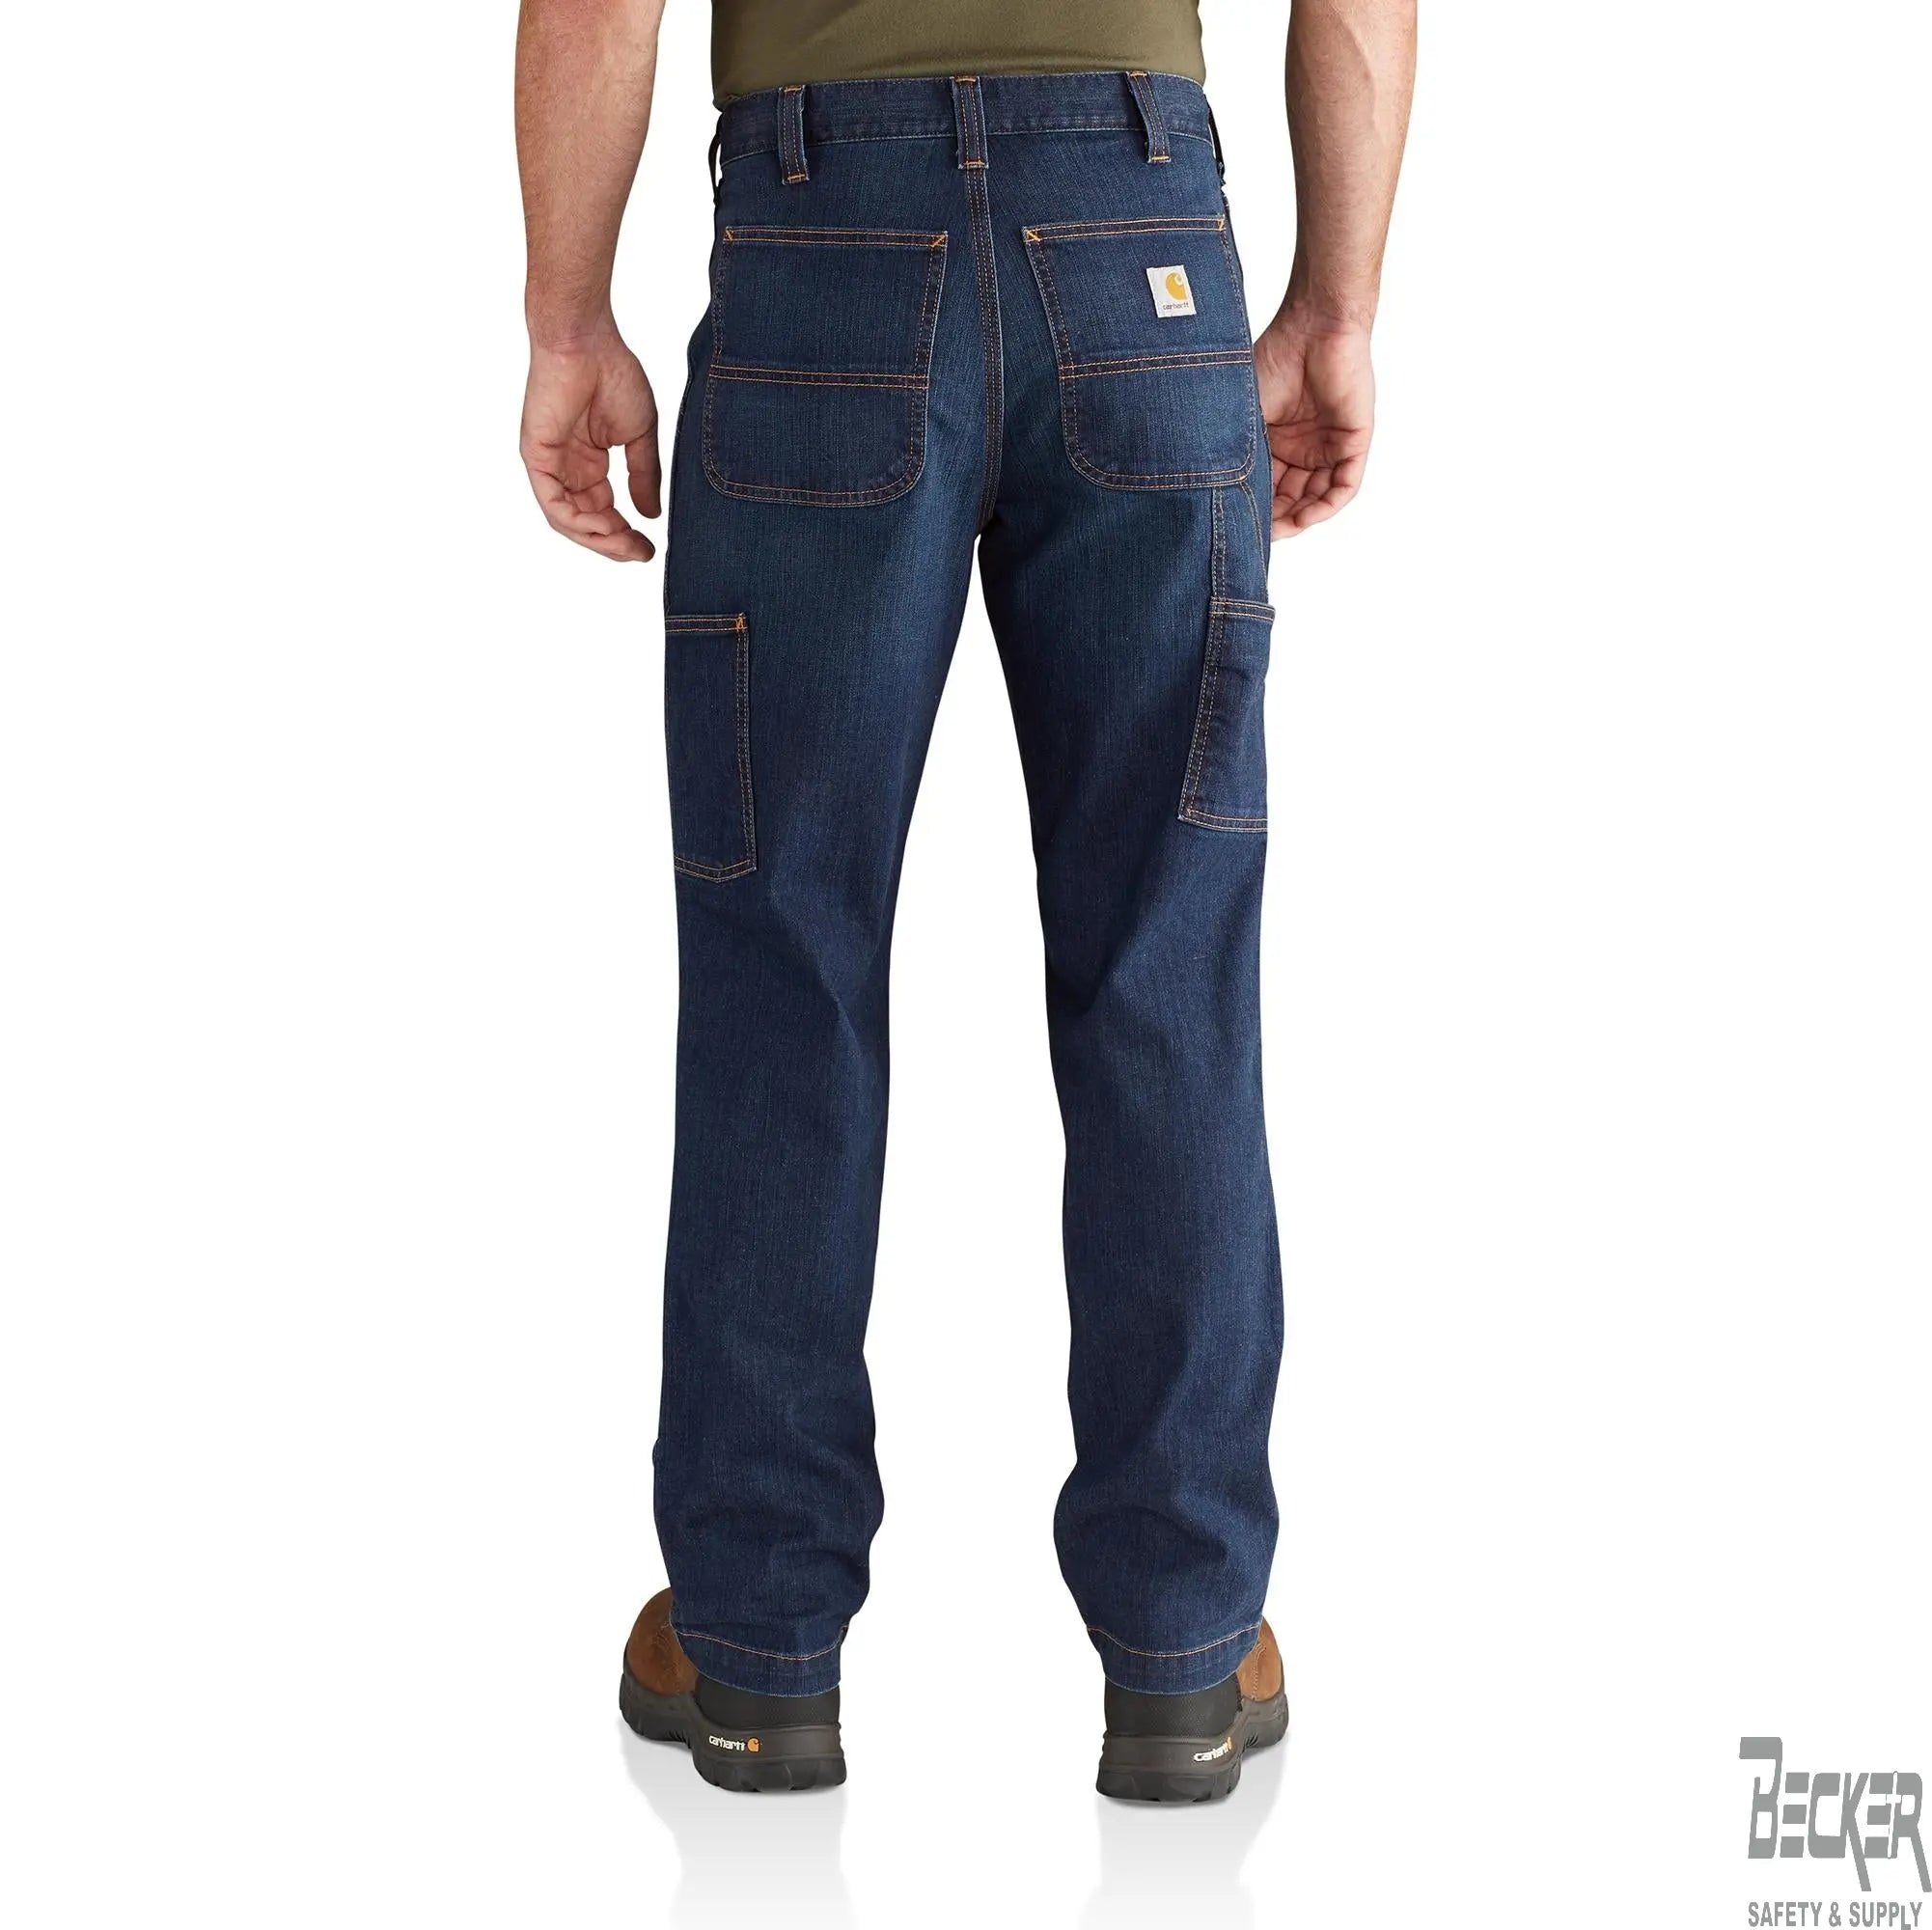 CARHARTT - Rugged Flex Relaxed Fit 5-Pocket Jean - Becker Safety and Supply